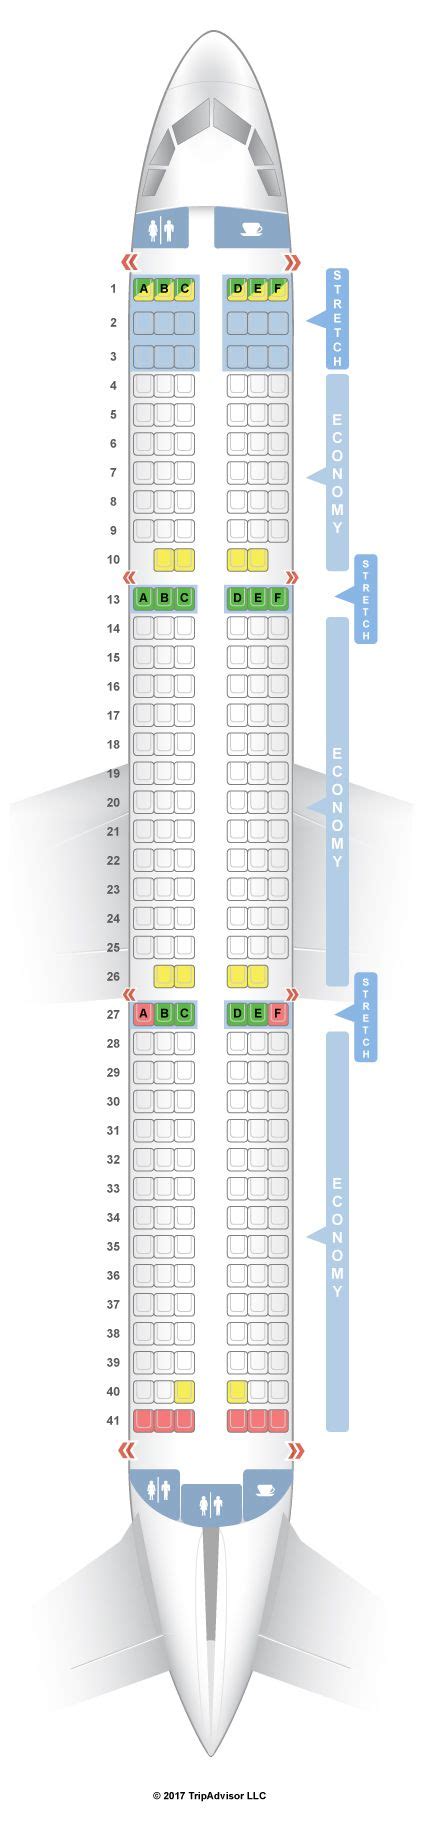 Frontier Seating Chart Airplane